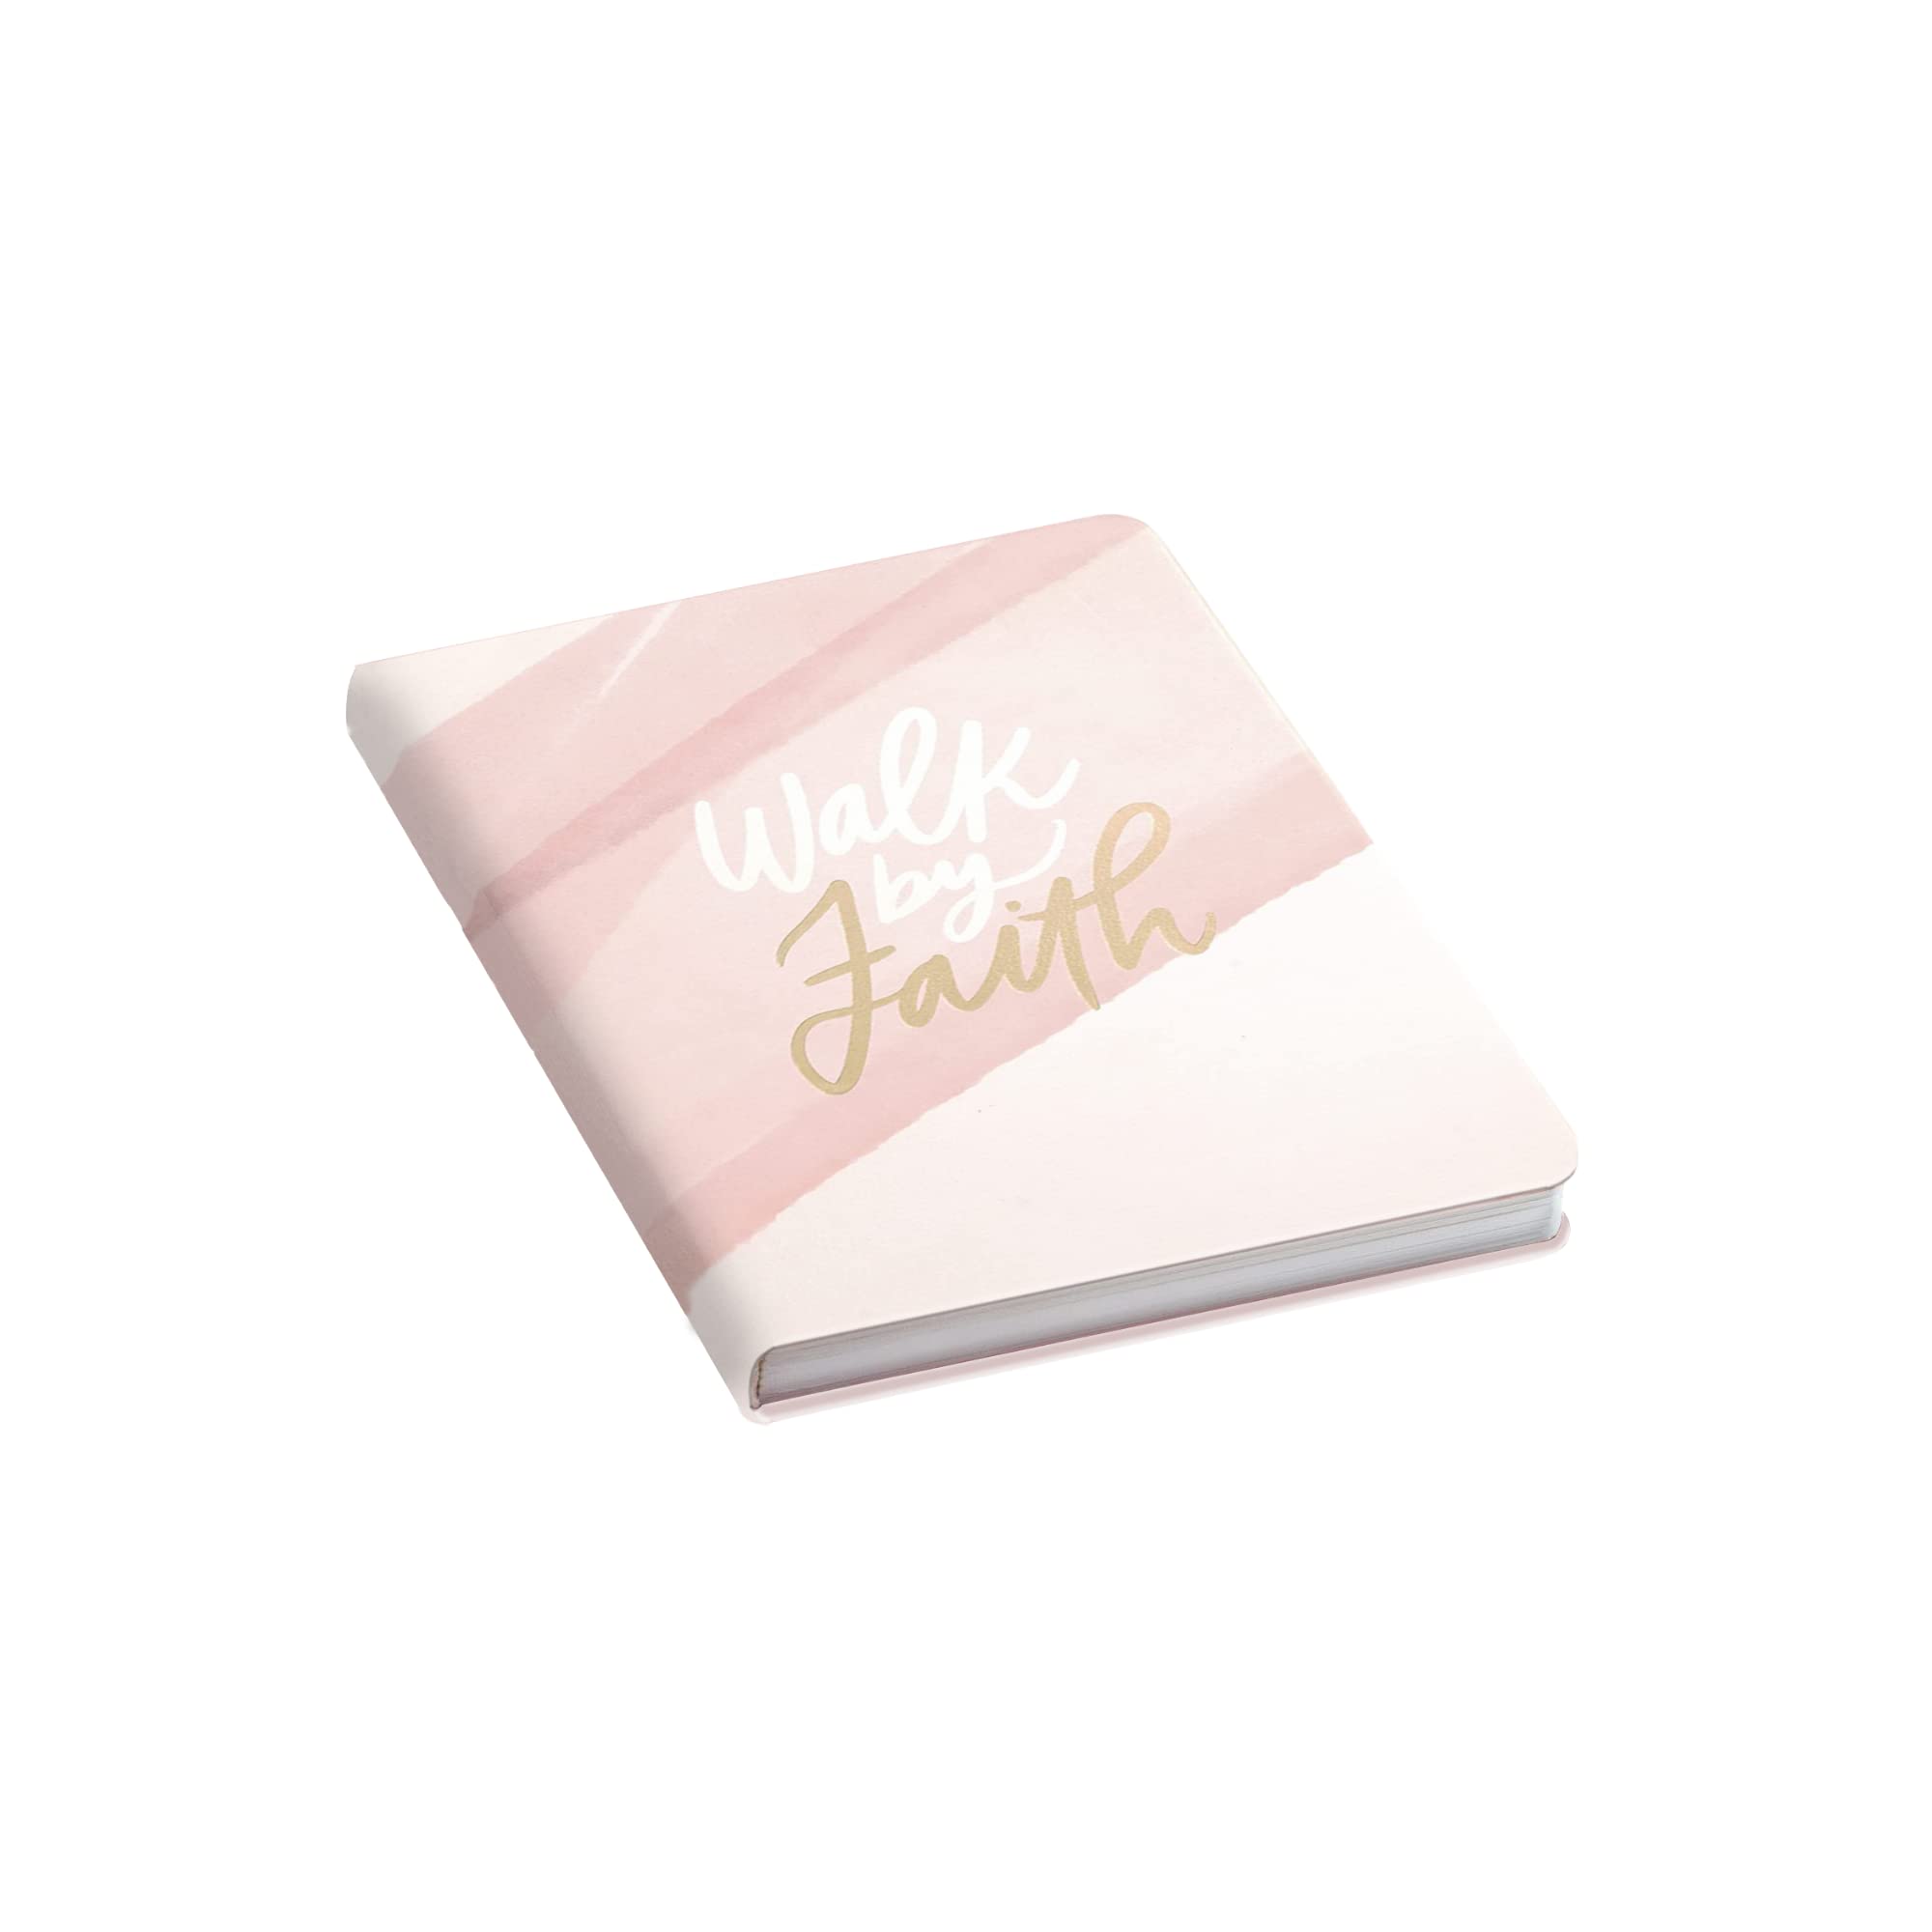 Inspirational Watercolor Notebook Journal for Women and Men